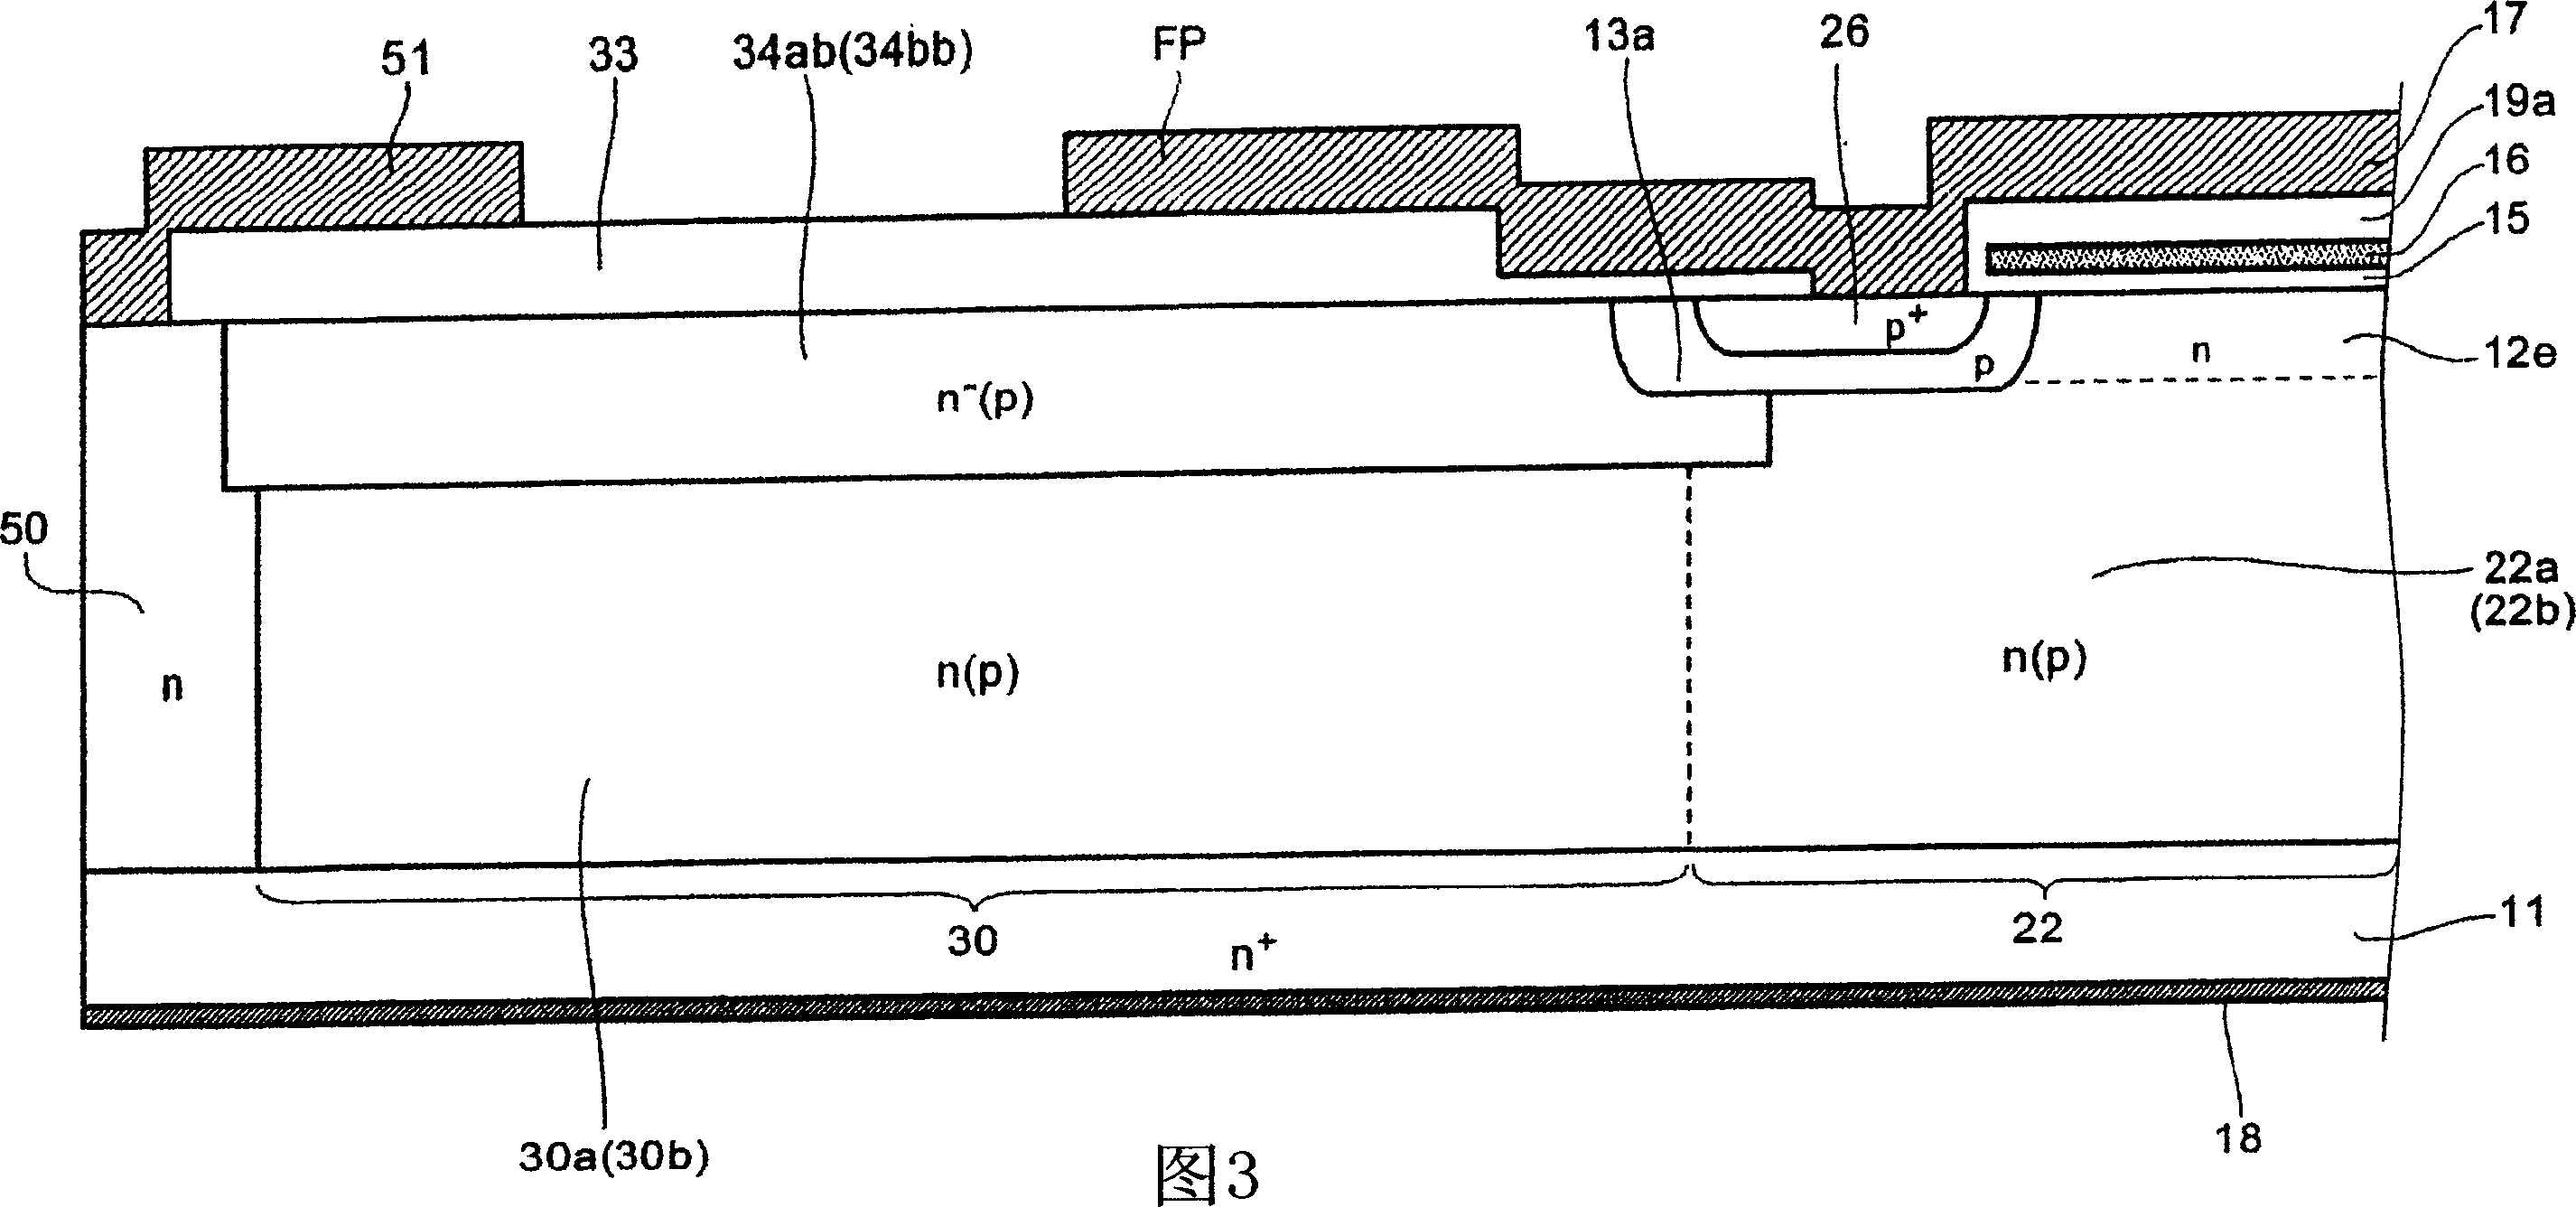 Semiconductor device with improved breakdown voltage and high current capacity